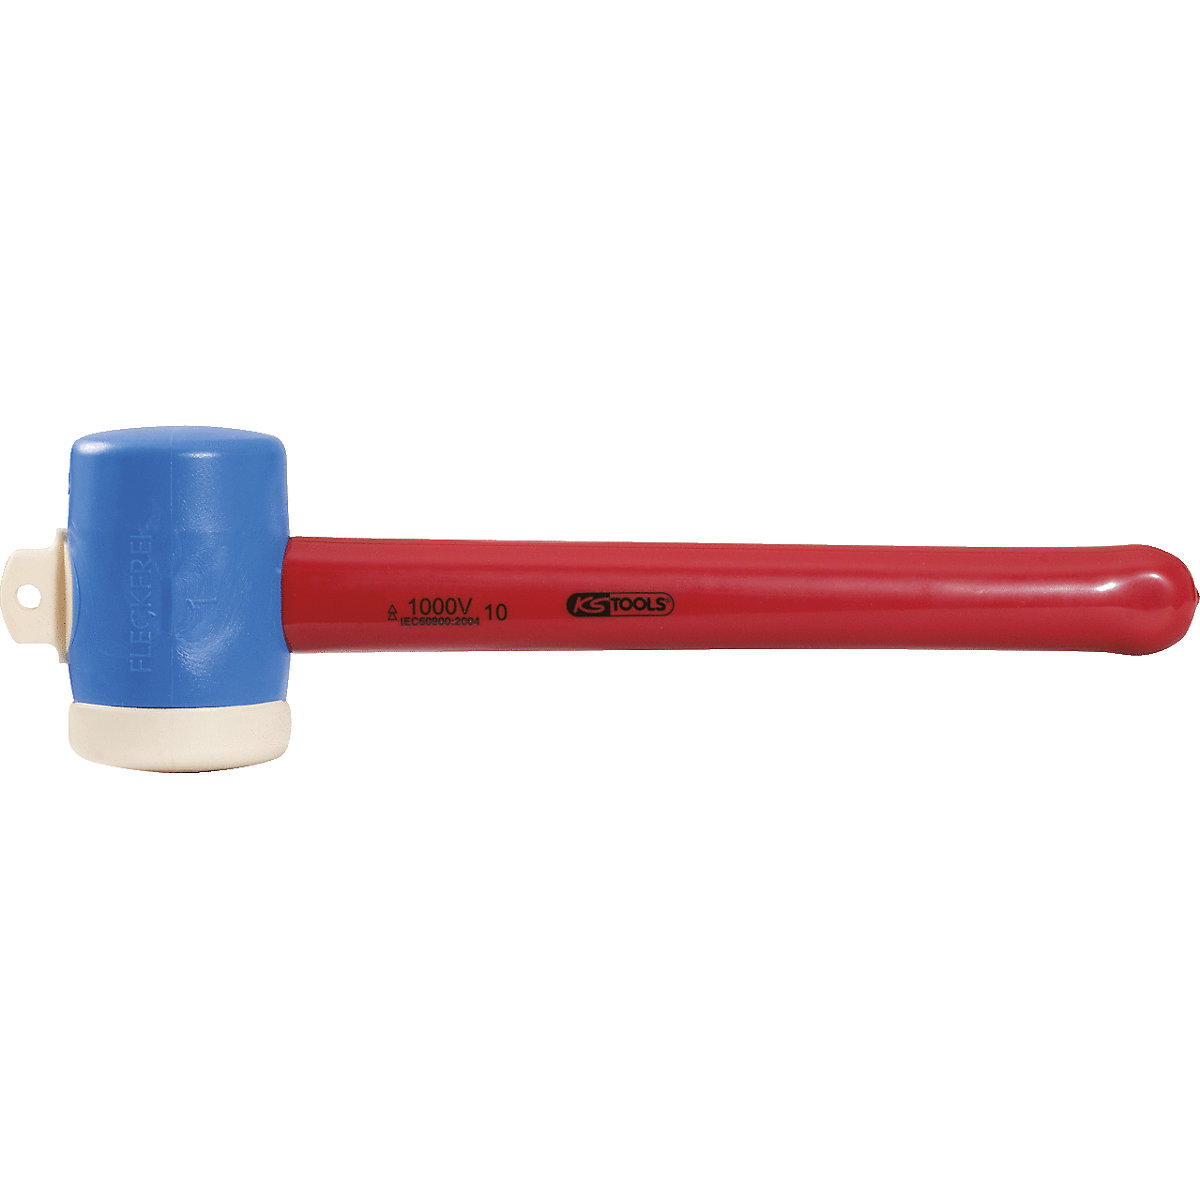 Plastic hammer with protective insulation - KS Tools